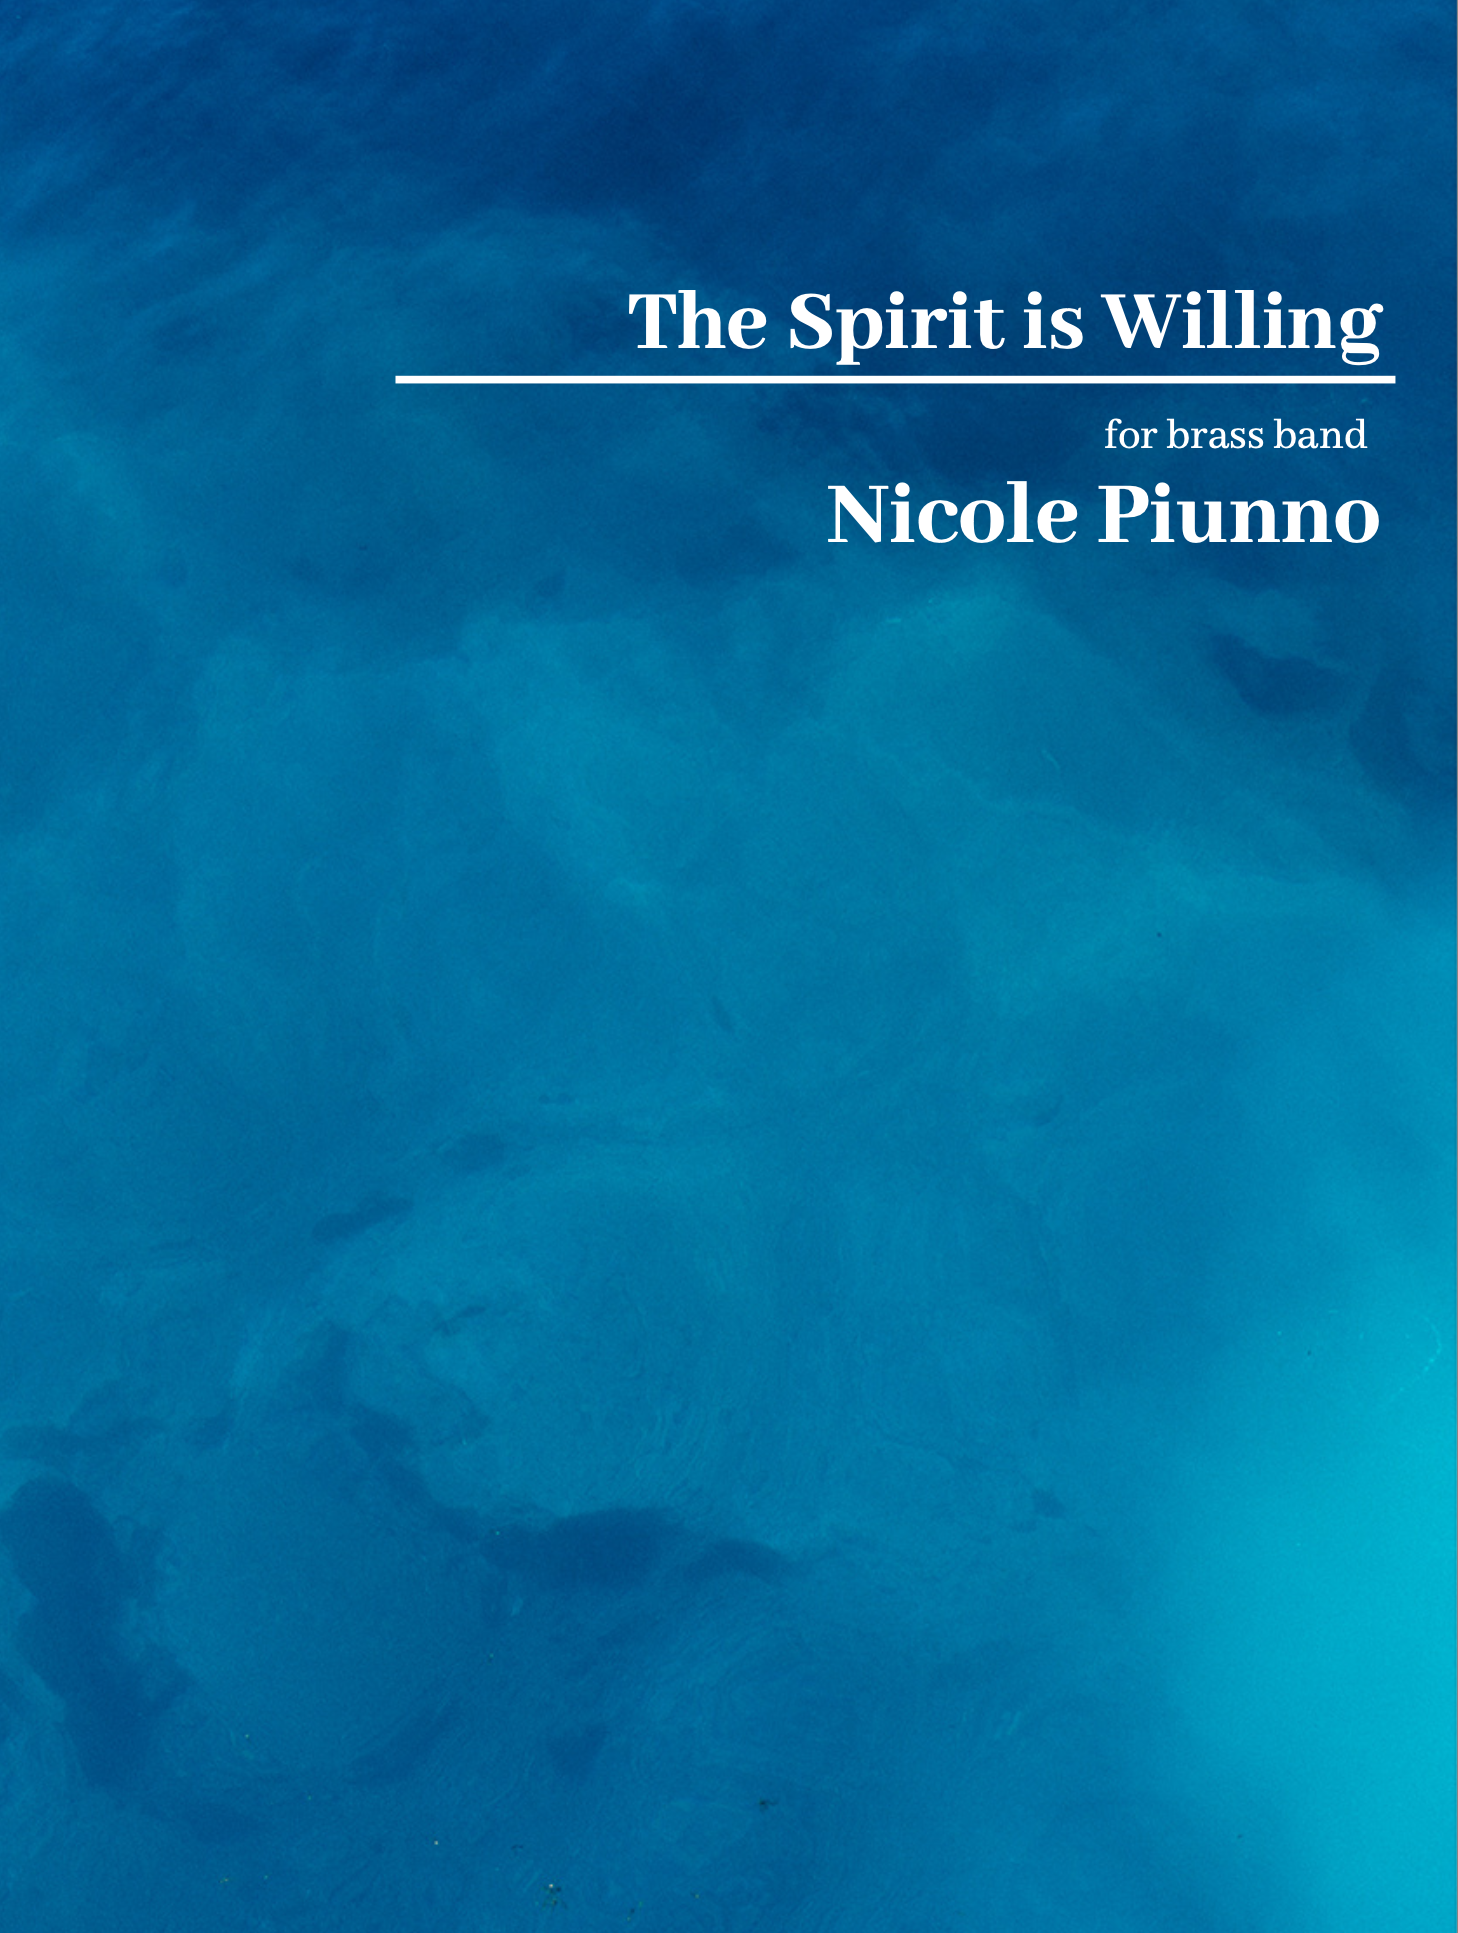 The Spirit Is Willing by Nicole Piunno